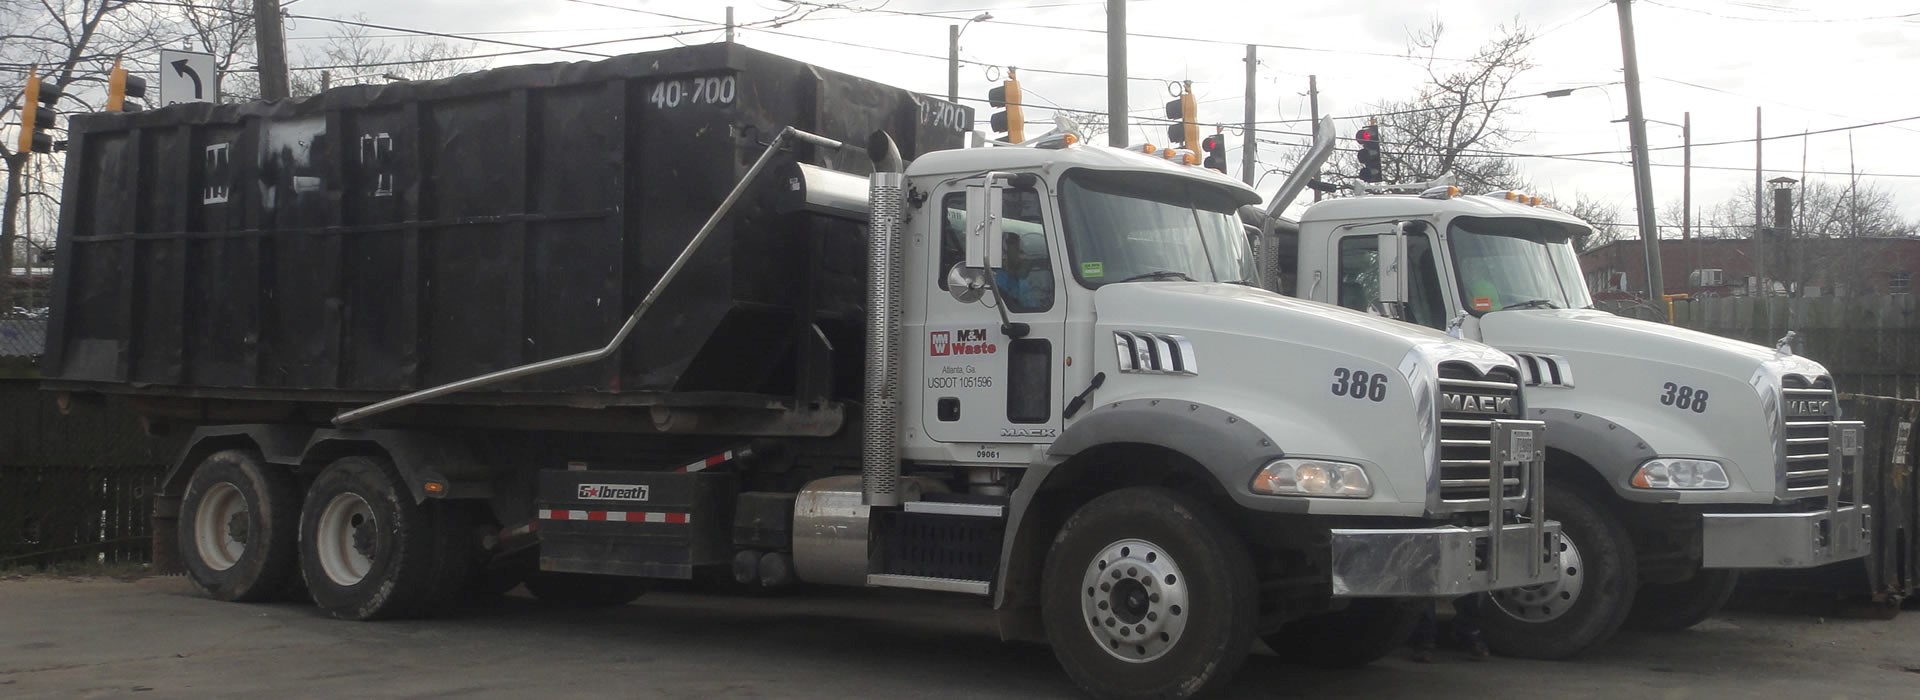 image - Hire A Professional Construction Waste Removal Service